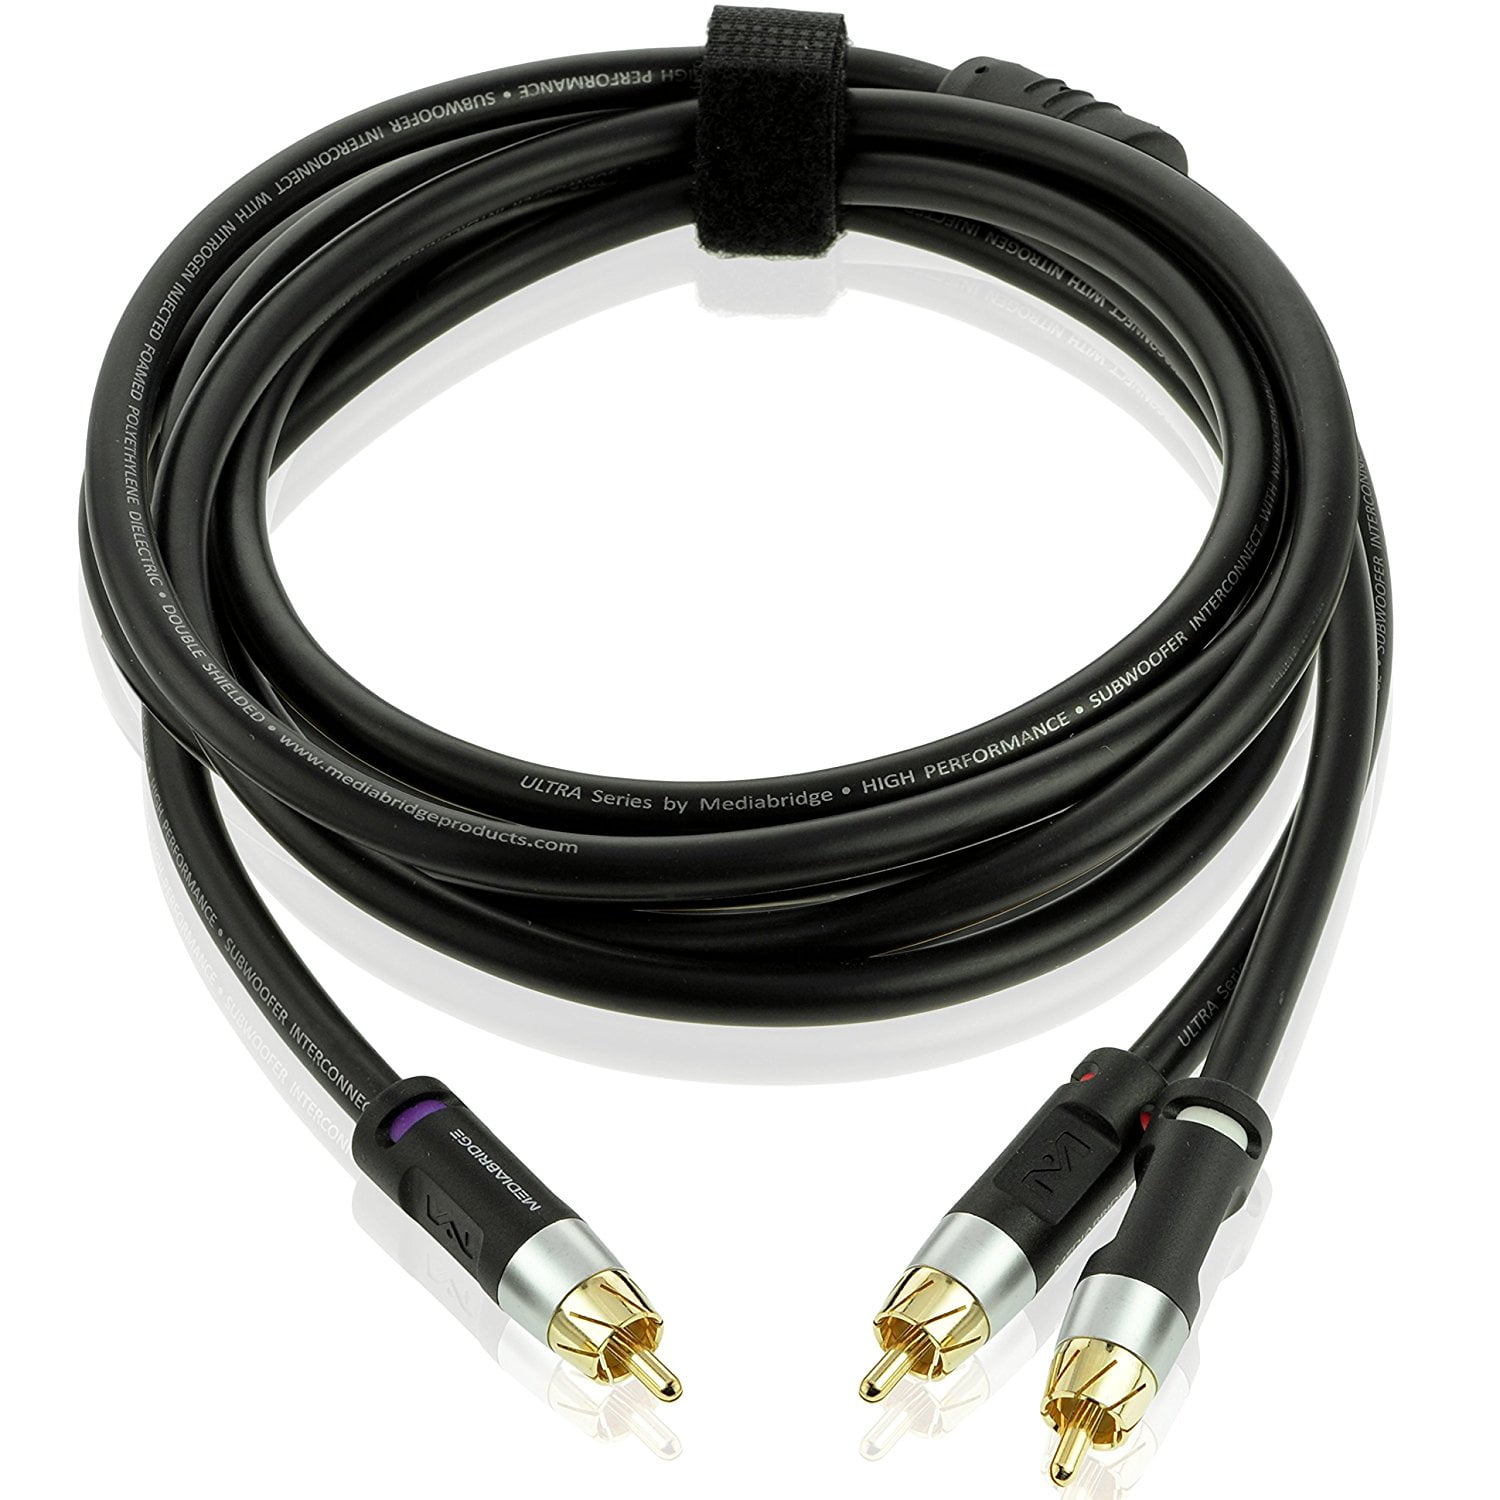 50ft RCA Male to Male M/M Gold Plugs RG59U Coax/Coaxial Subwoofer Cable 